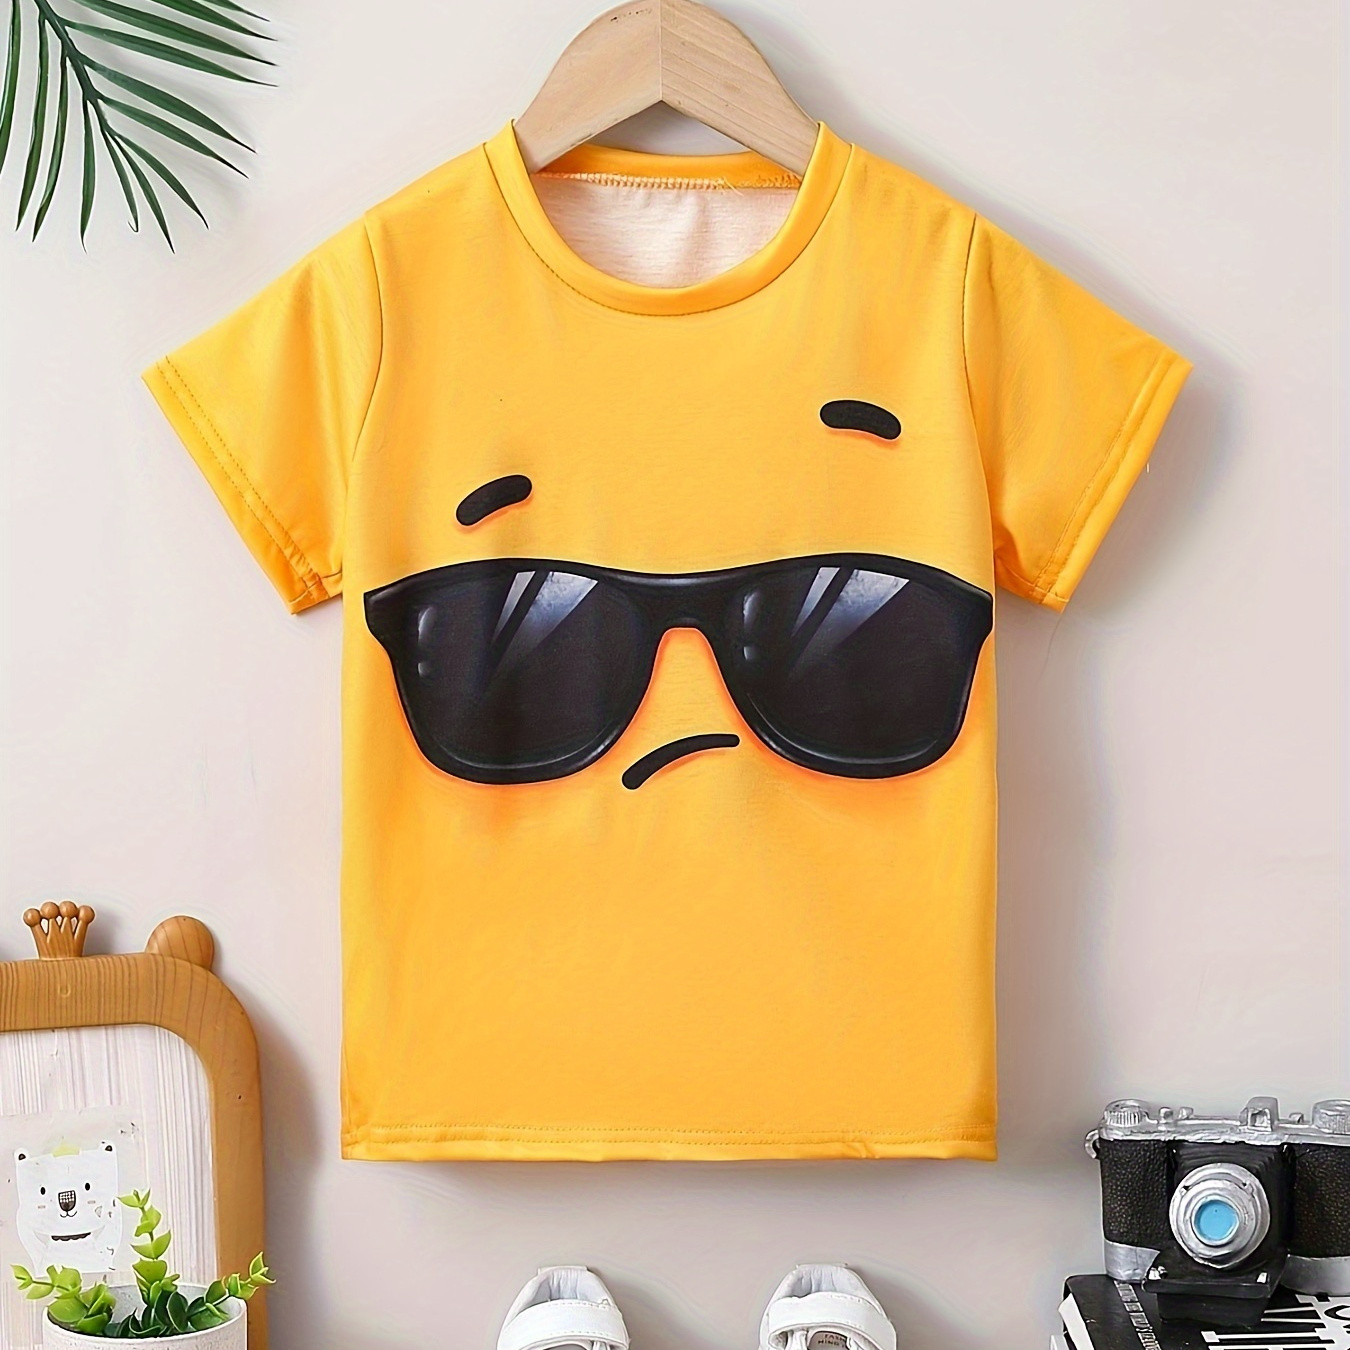 

Cool Sunglasses Face Print Crew Neck T-shirt, Casual Short Sleeve Tee Tops For Spring & Summer, Boy's Clothing